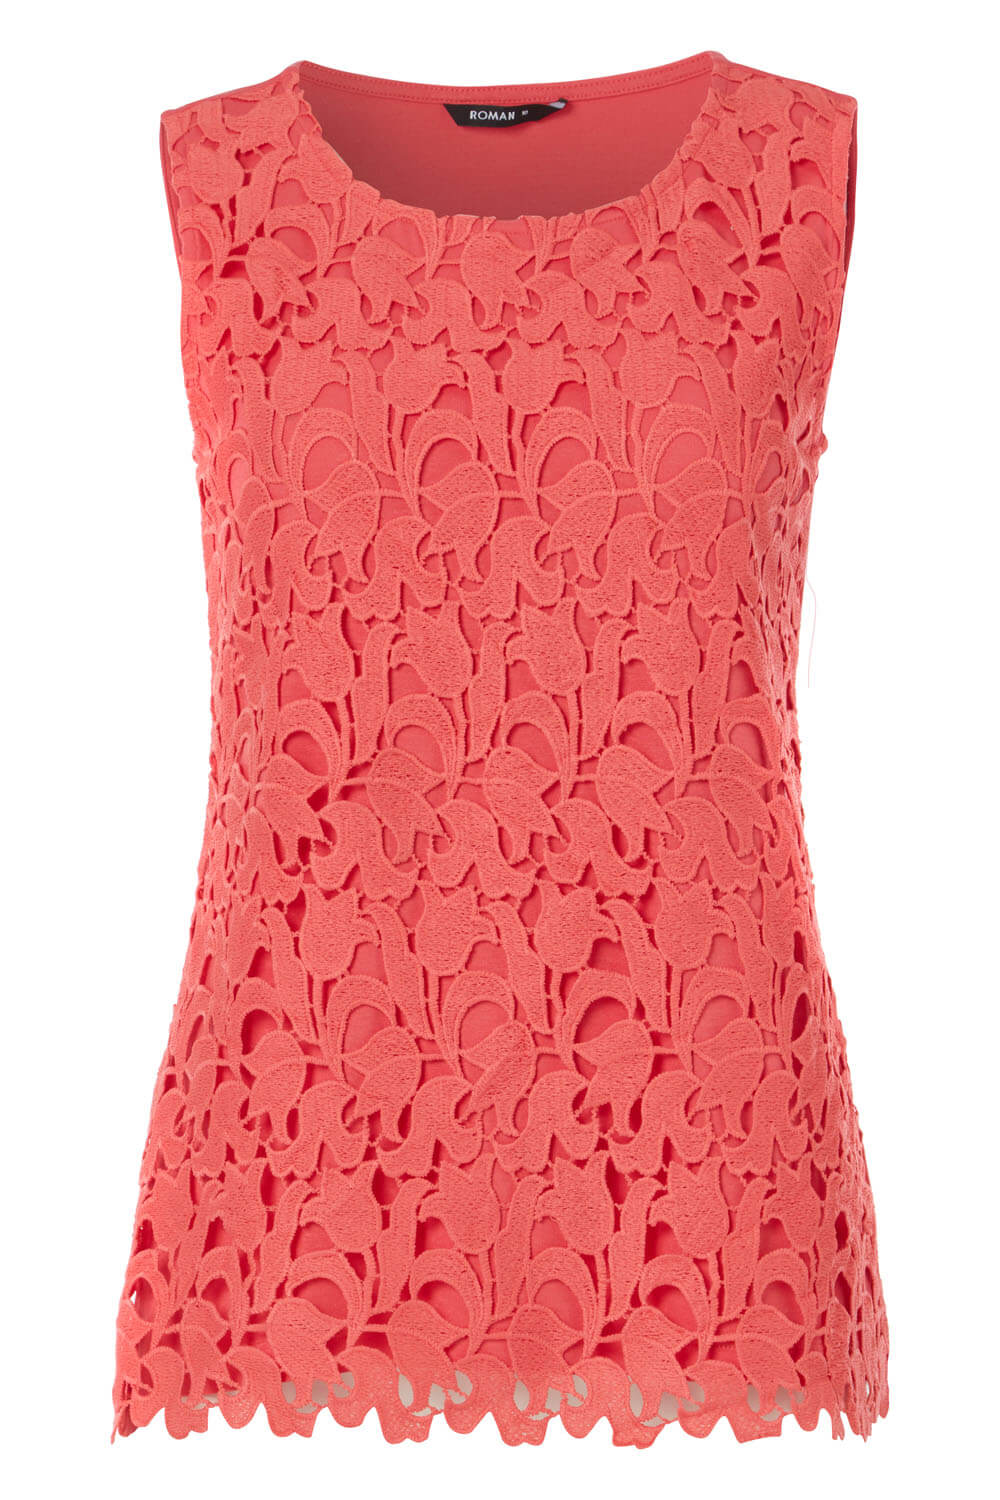 CORAL Floral Lace Front Sleeveless Top, Image 5 of 5